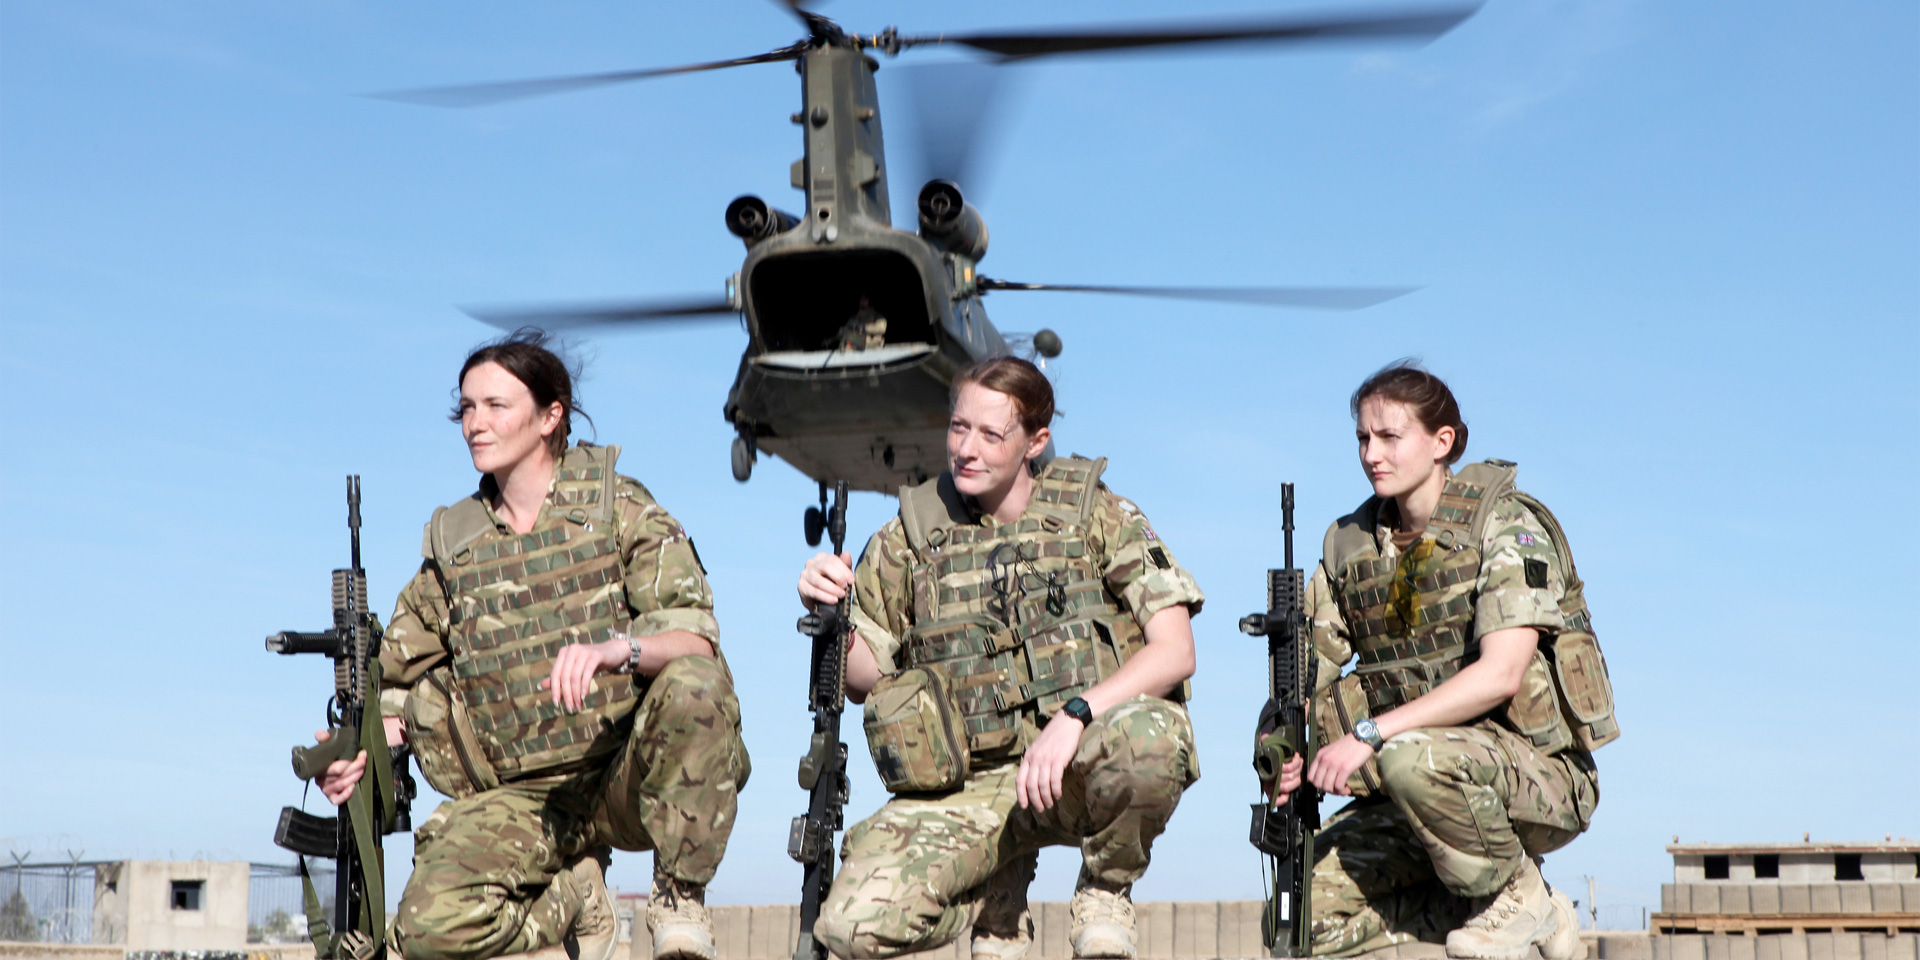 Female soldiers of The Royal Highland Fusiliers, Royal Regiment of Scotland, Helmand Province, 2011